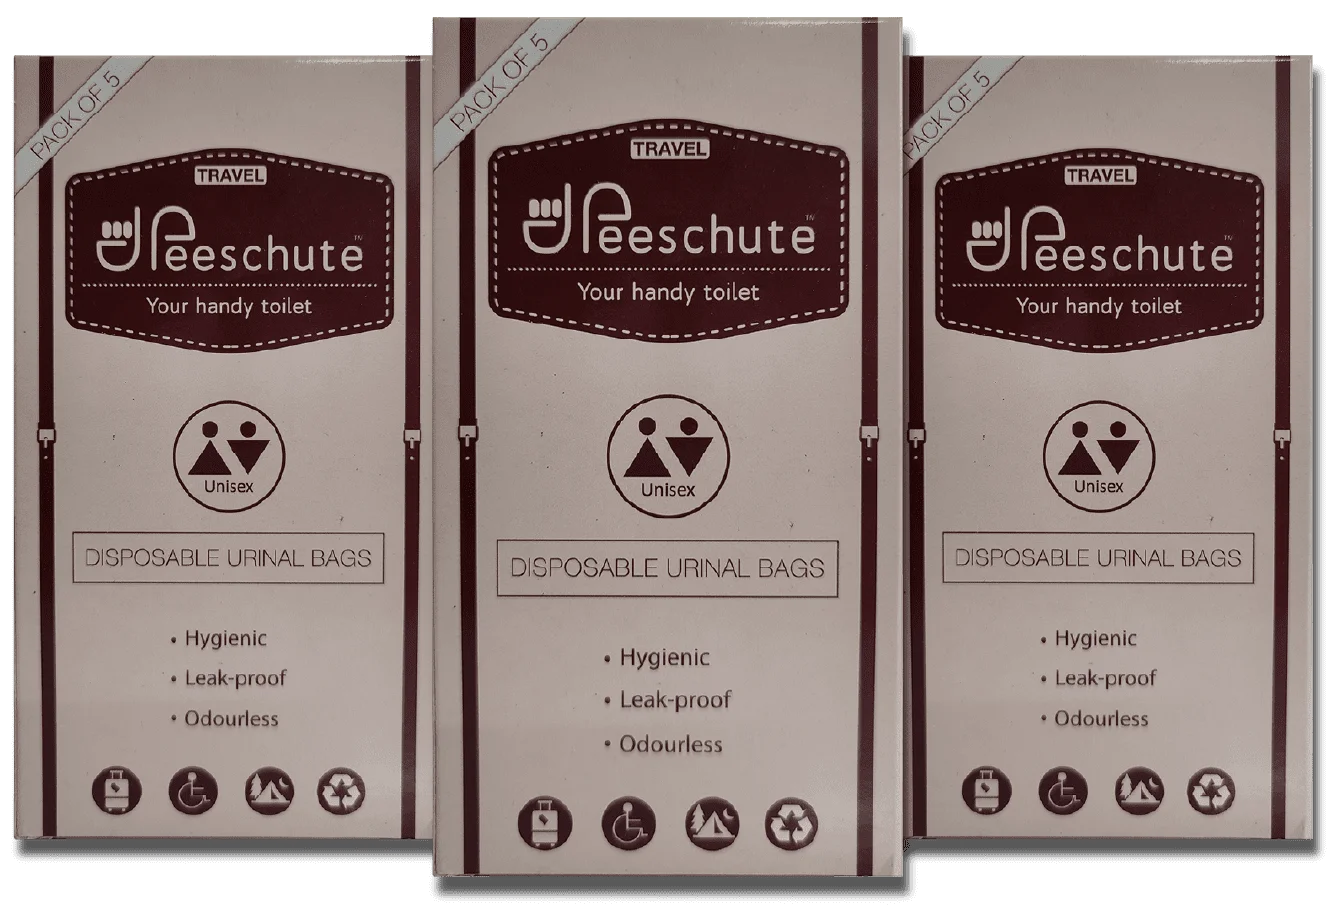 Peeschute Travel-Disposable Pee Bags for travel